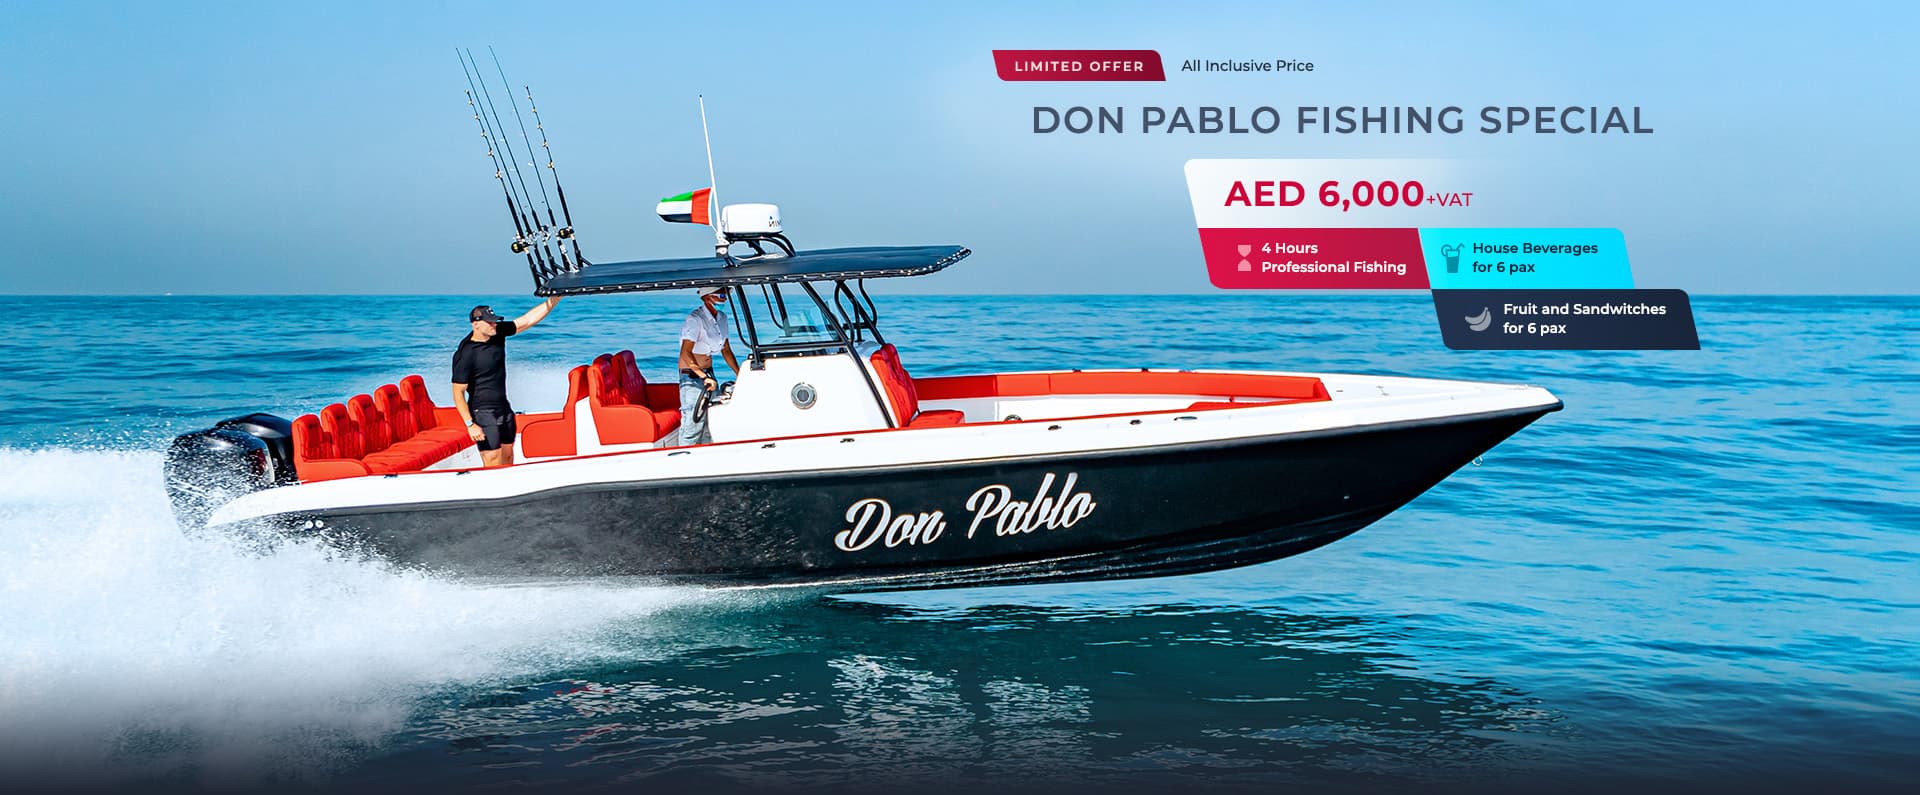 Don Pablo Fishing Special